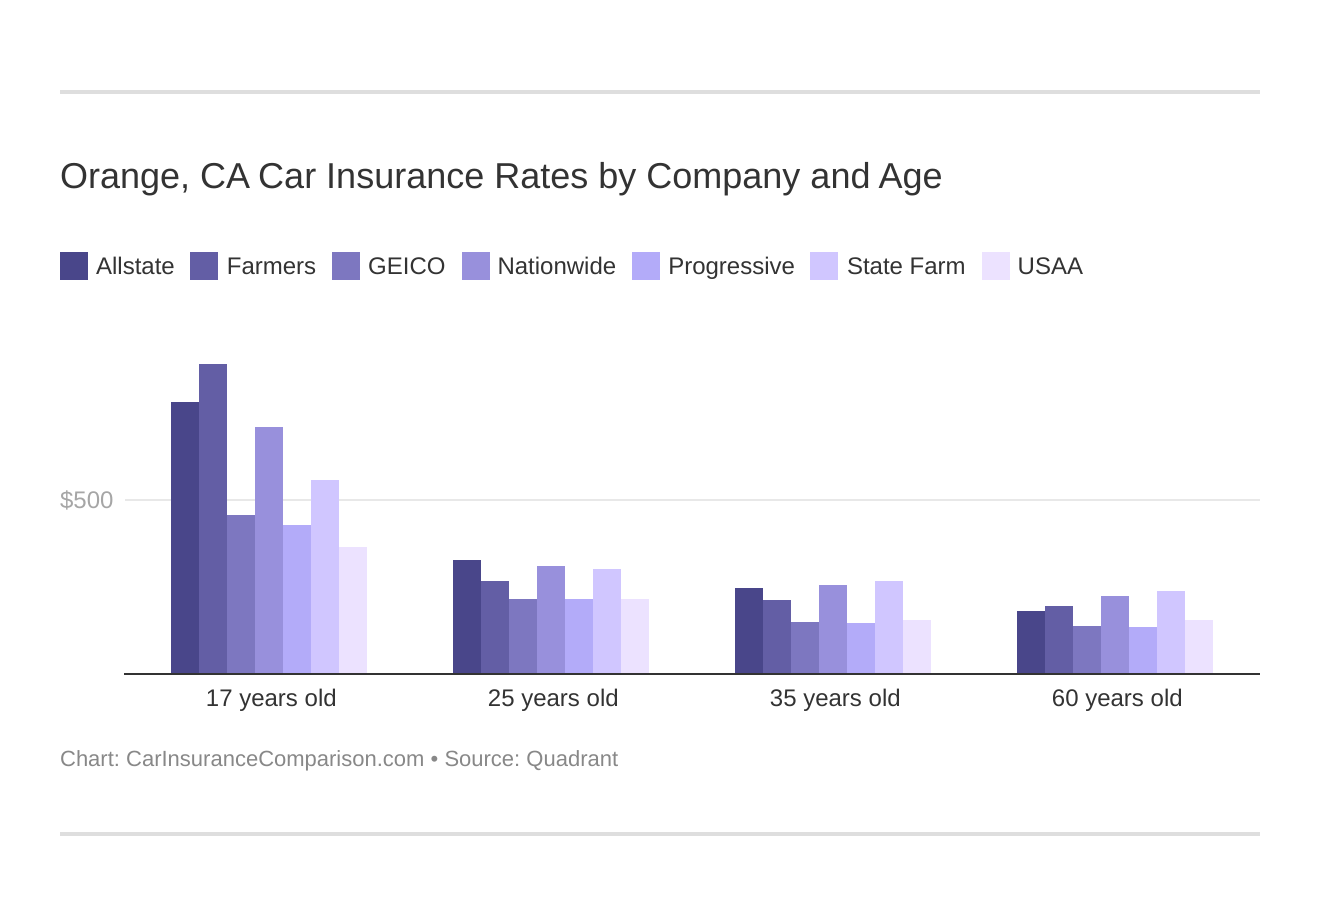 Orange, CA Car Insurance Rates by Company and Age